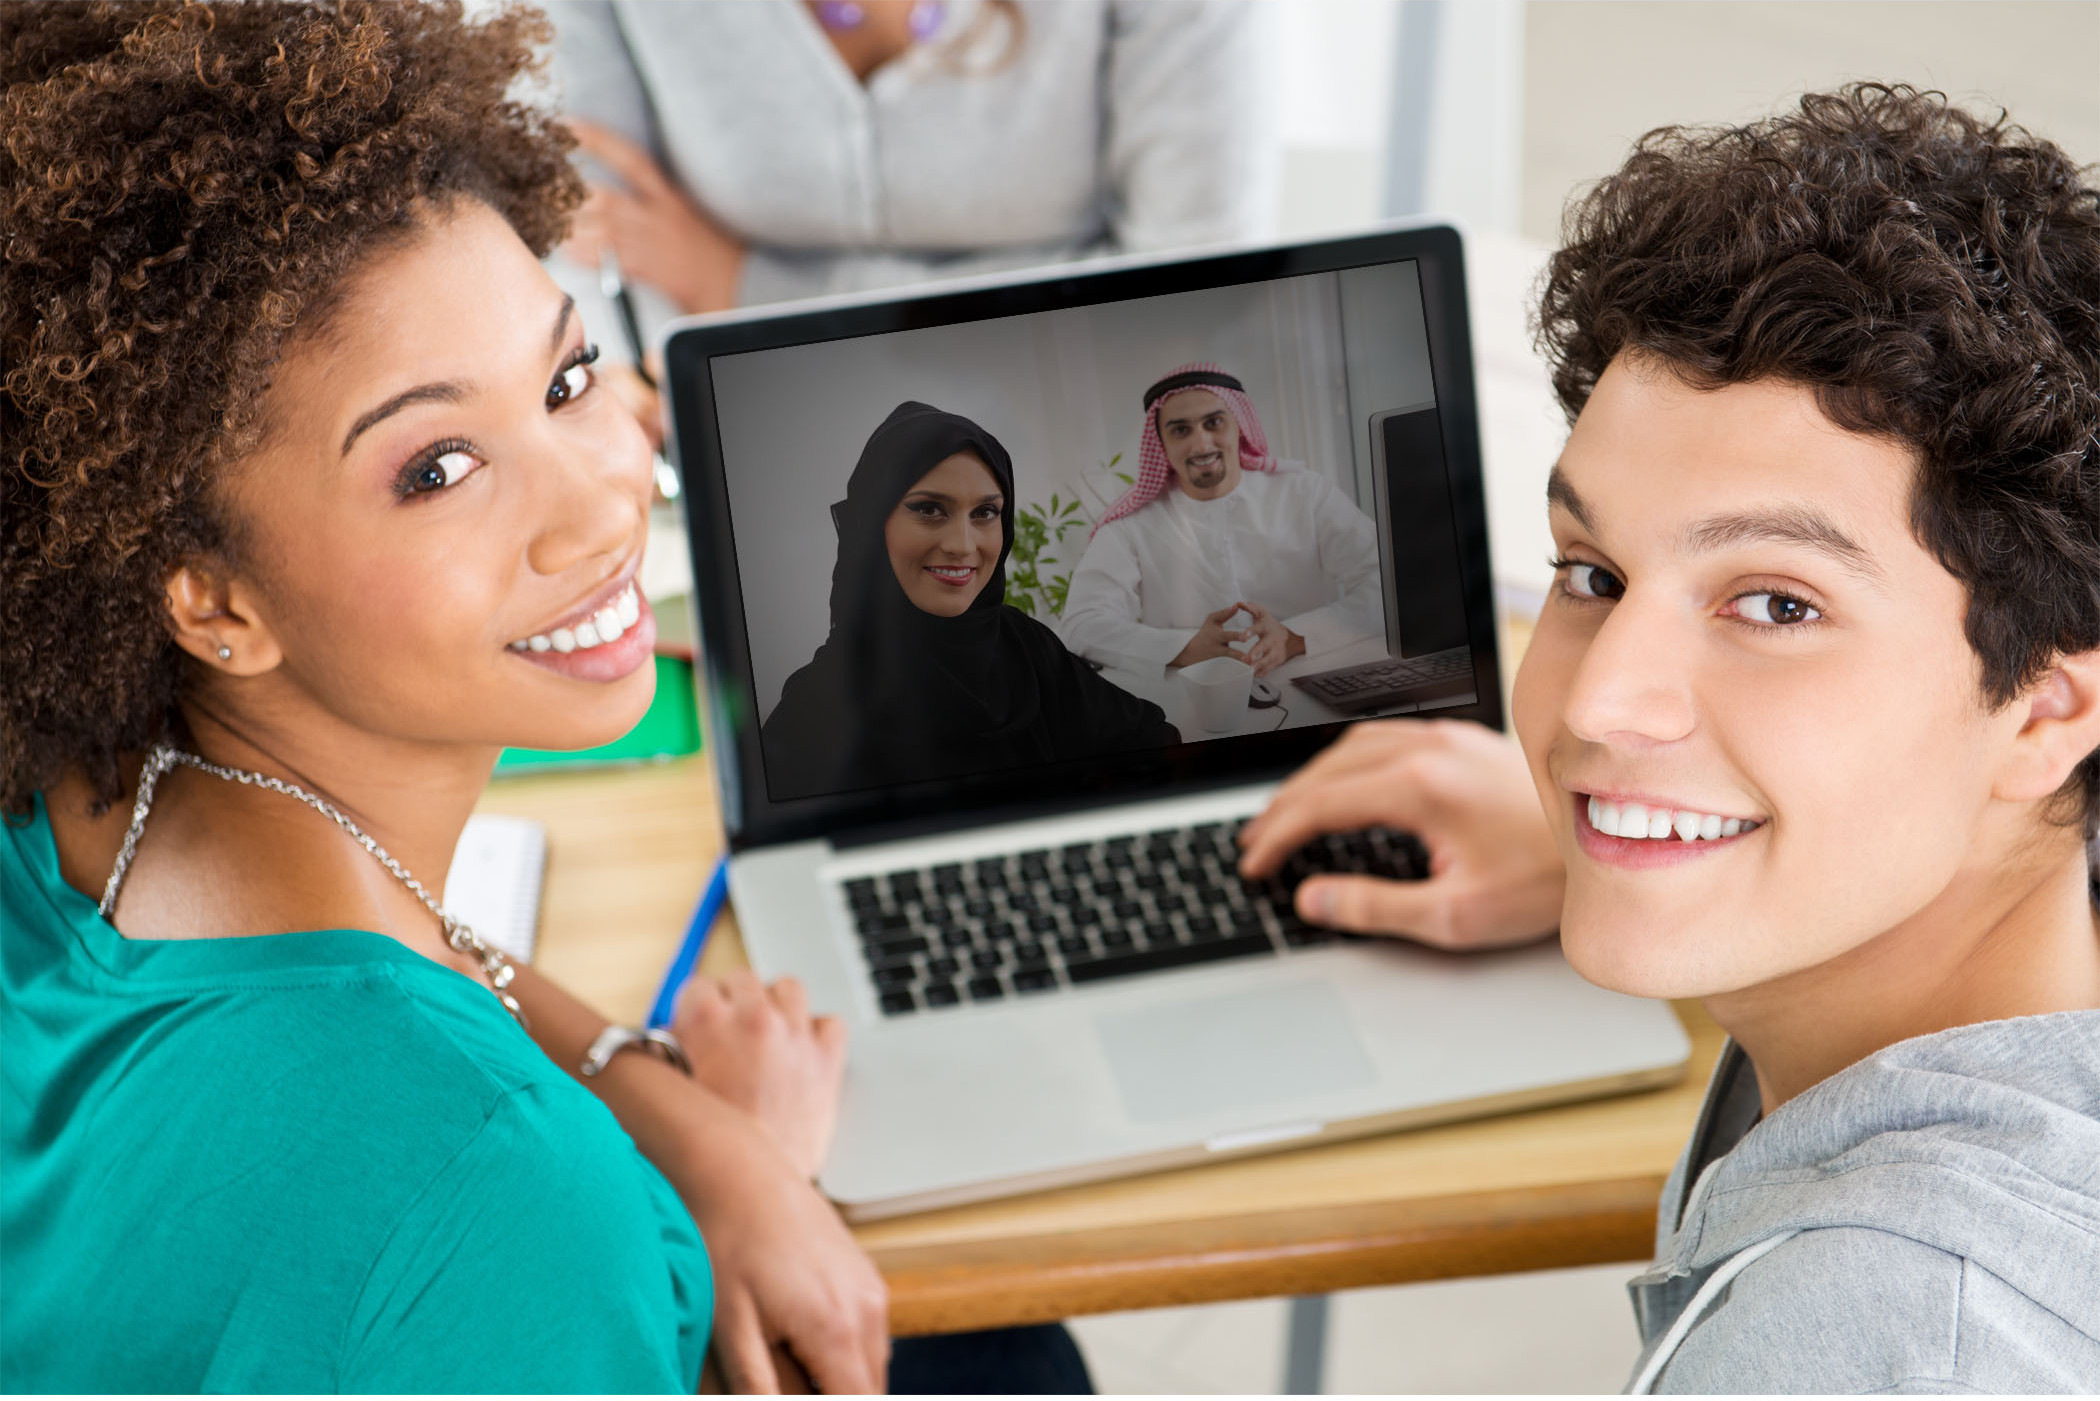 Improve in English through Skype or other video chat services.